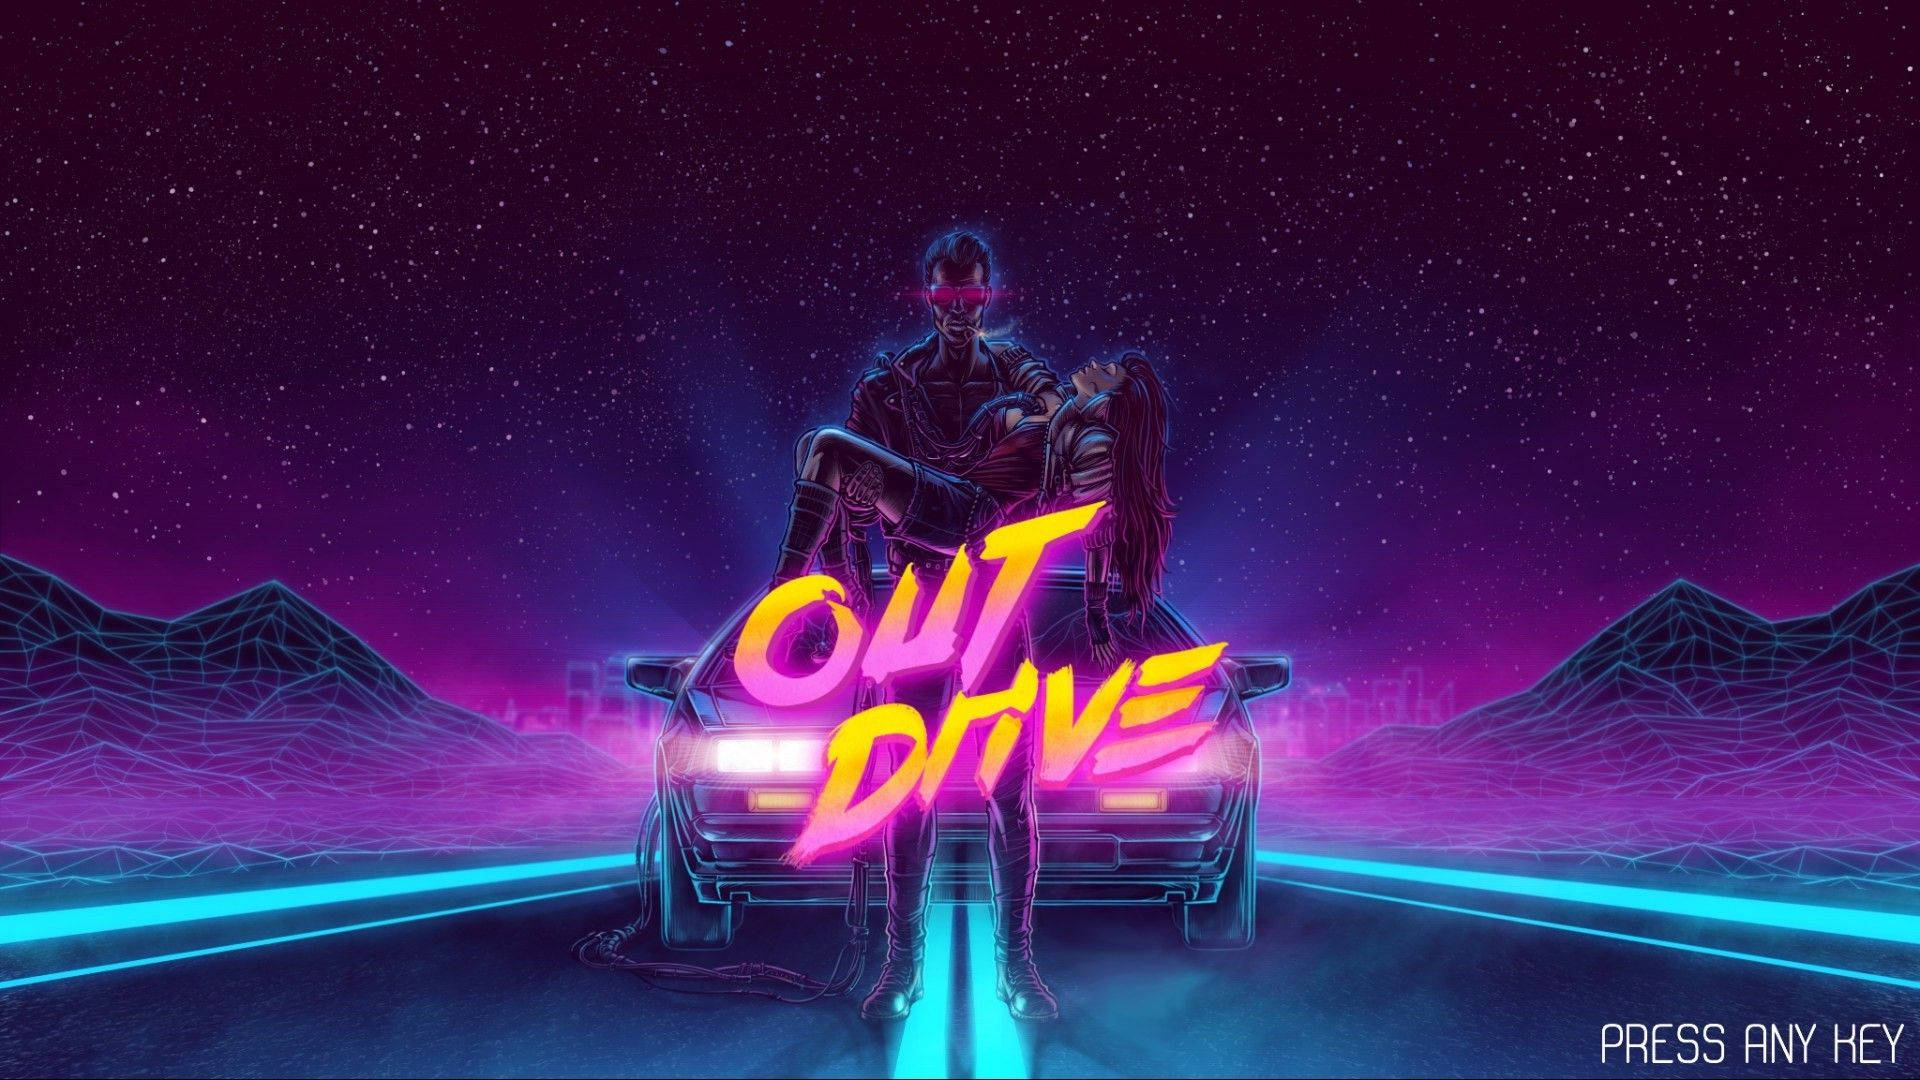 Free 80s Wallpaper Downloads, [100+] 80s Wallpapers for FREE | Wallpapers .com